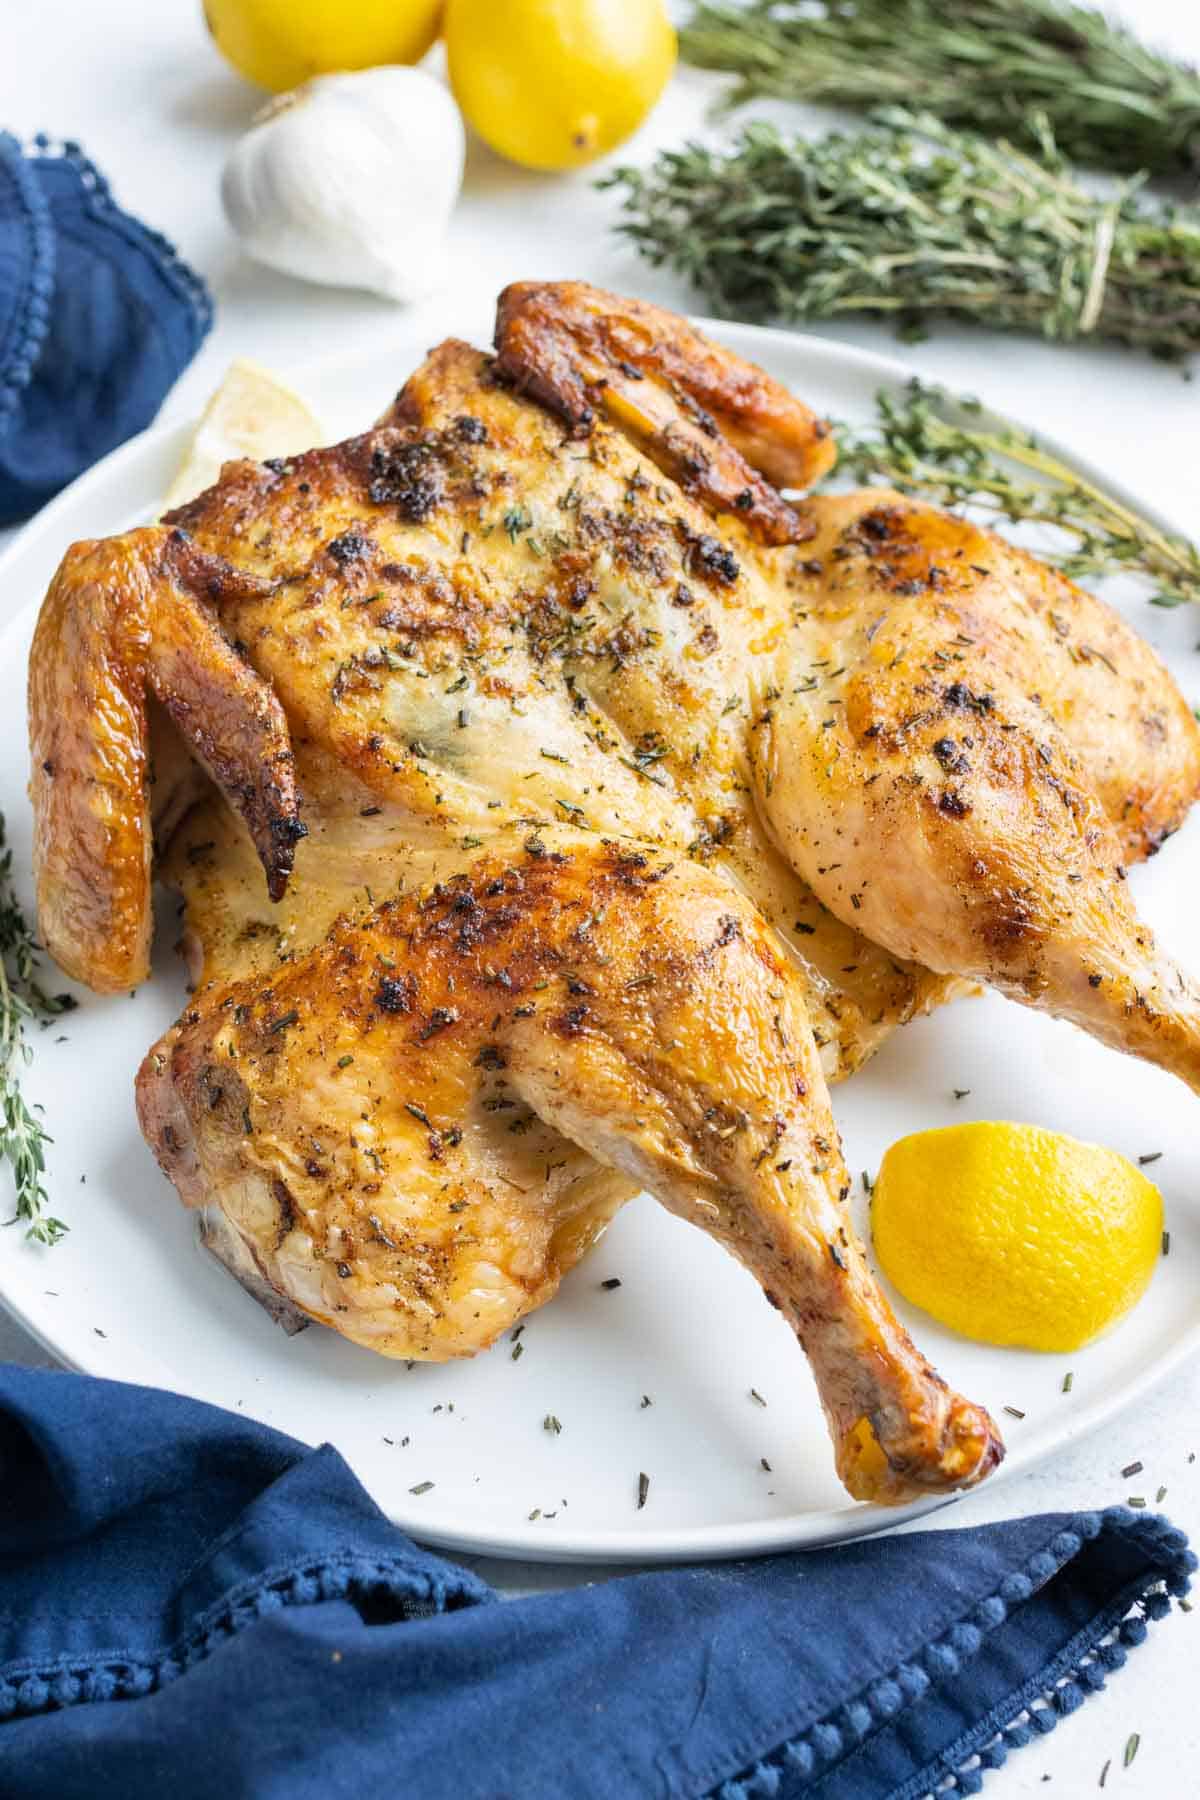 Season spatchcock chicken with garlic herb butter and lemons.